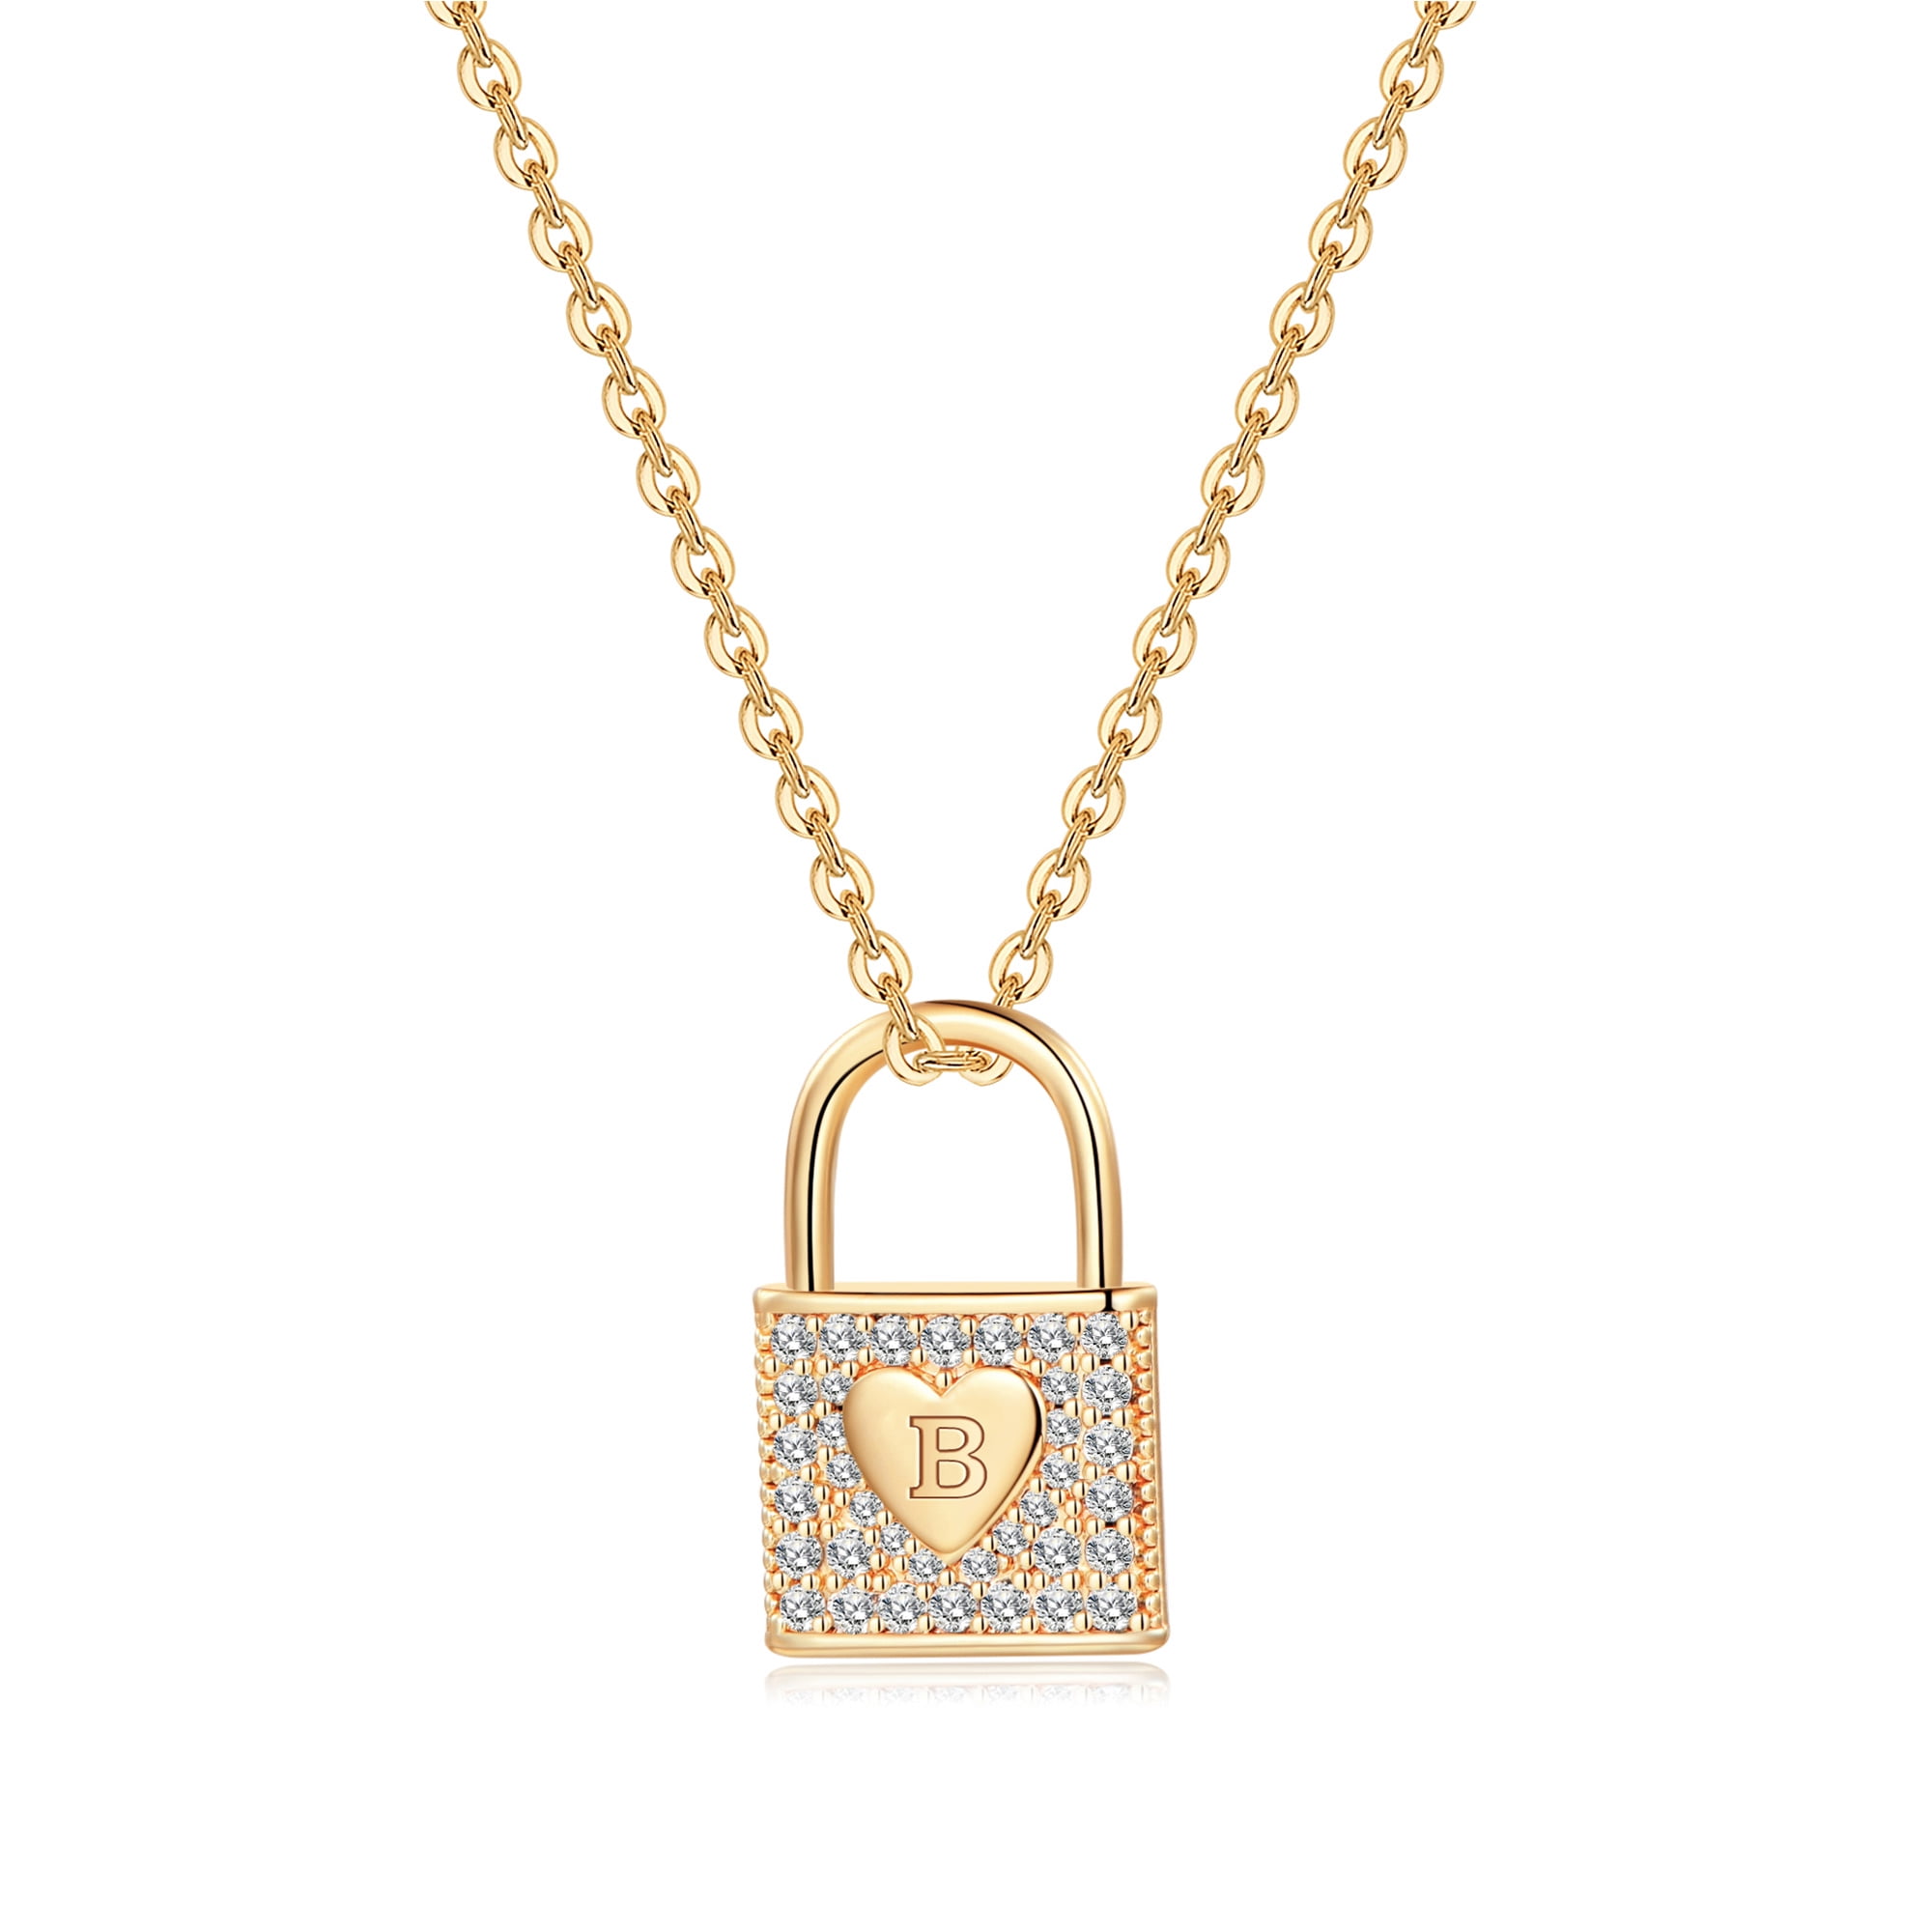 TINGN Lock Necklace for Women Dainty Lock Chain Necklace Letter E Initial Gold Padlock Necklace 51e84400 a2f4 45bb bfd1 47b057c0b0e9.b1ec8b2157dd17df8c75ae3bec5ed108